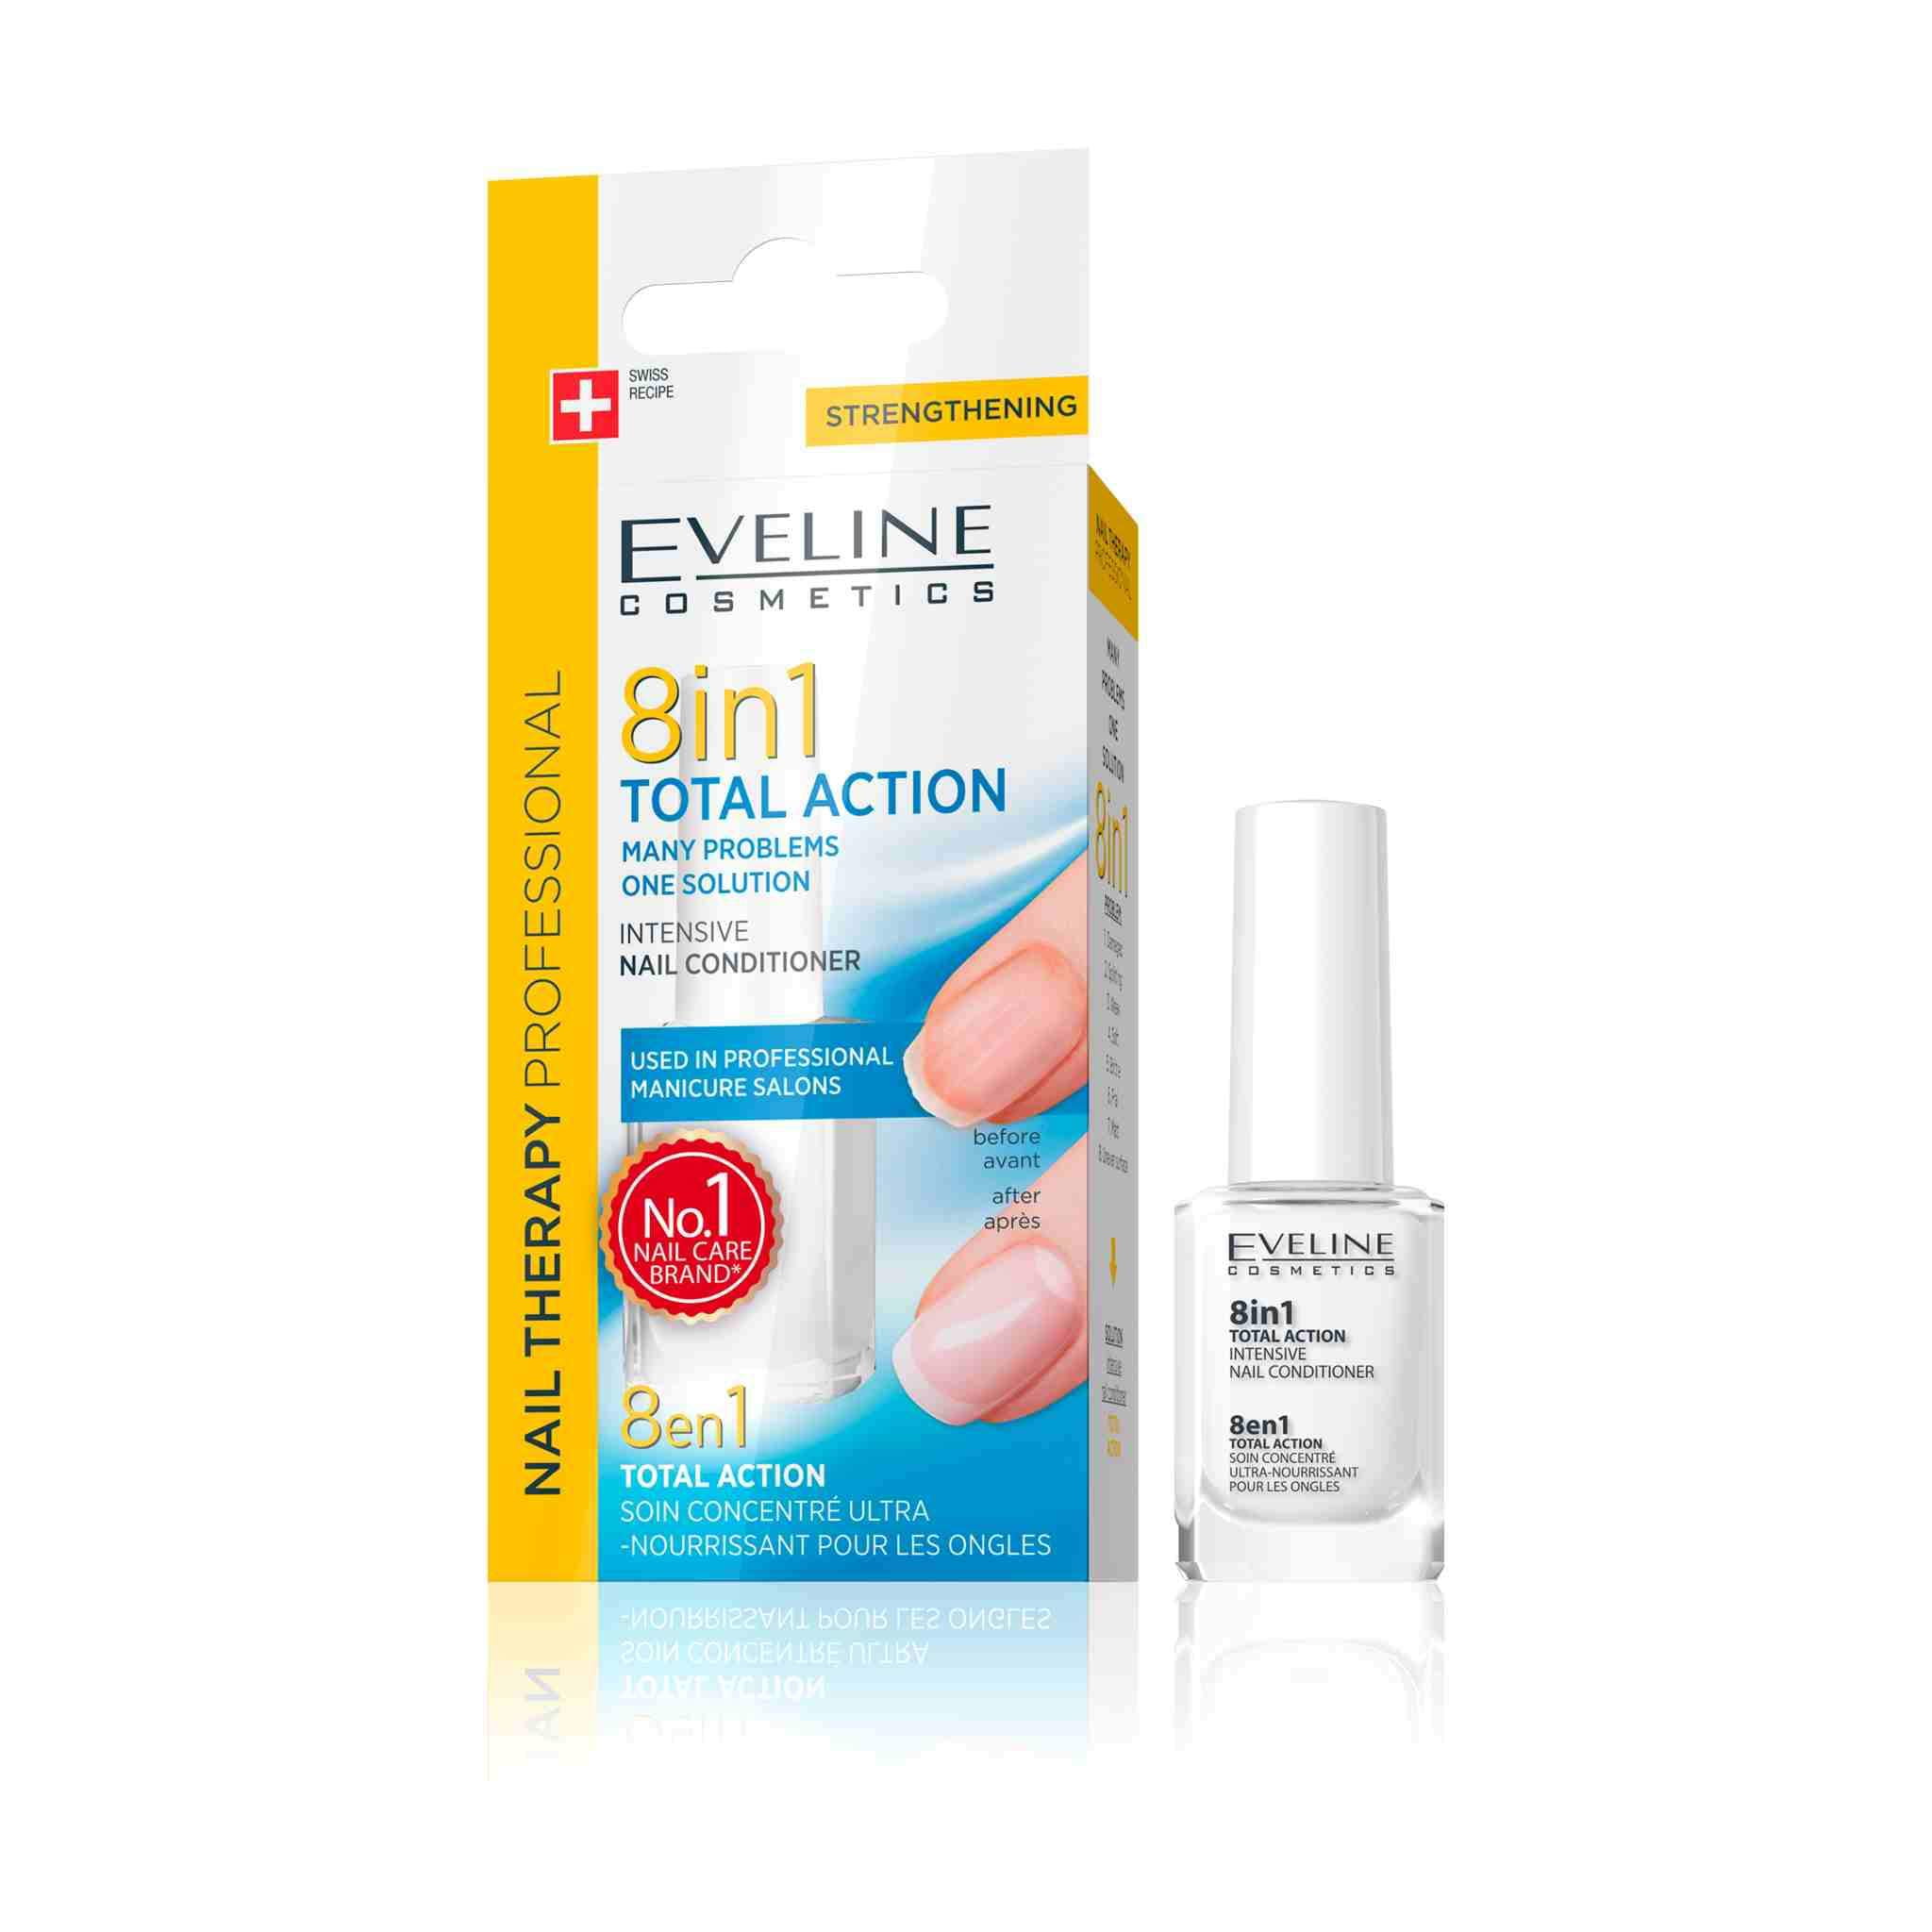 Kamp At redigere glas Eveline Cosmetics Total Action 8 in 1 Intensive Nail Conditioner, 0.4 fl oz  - Walmart.com